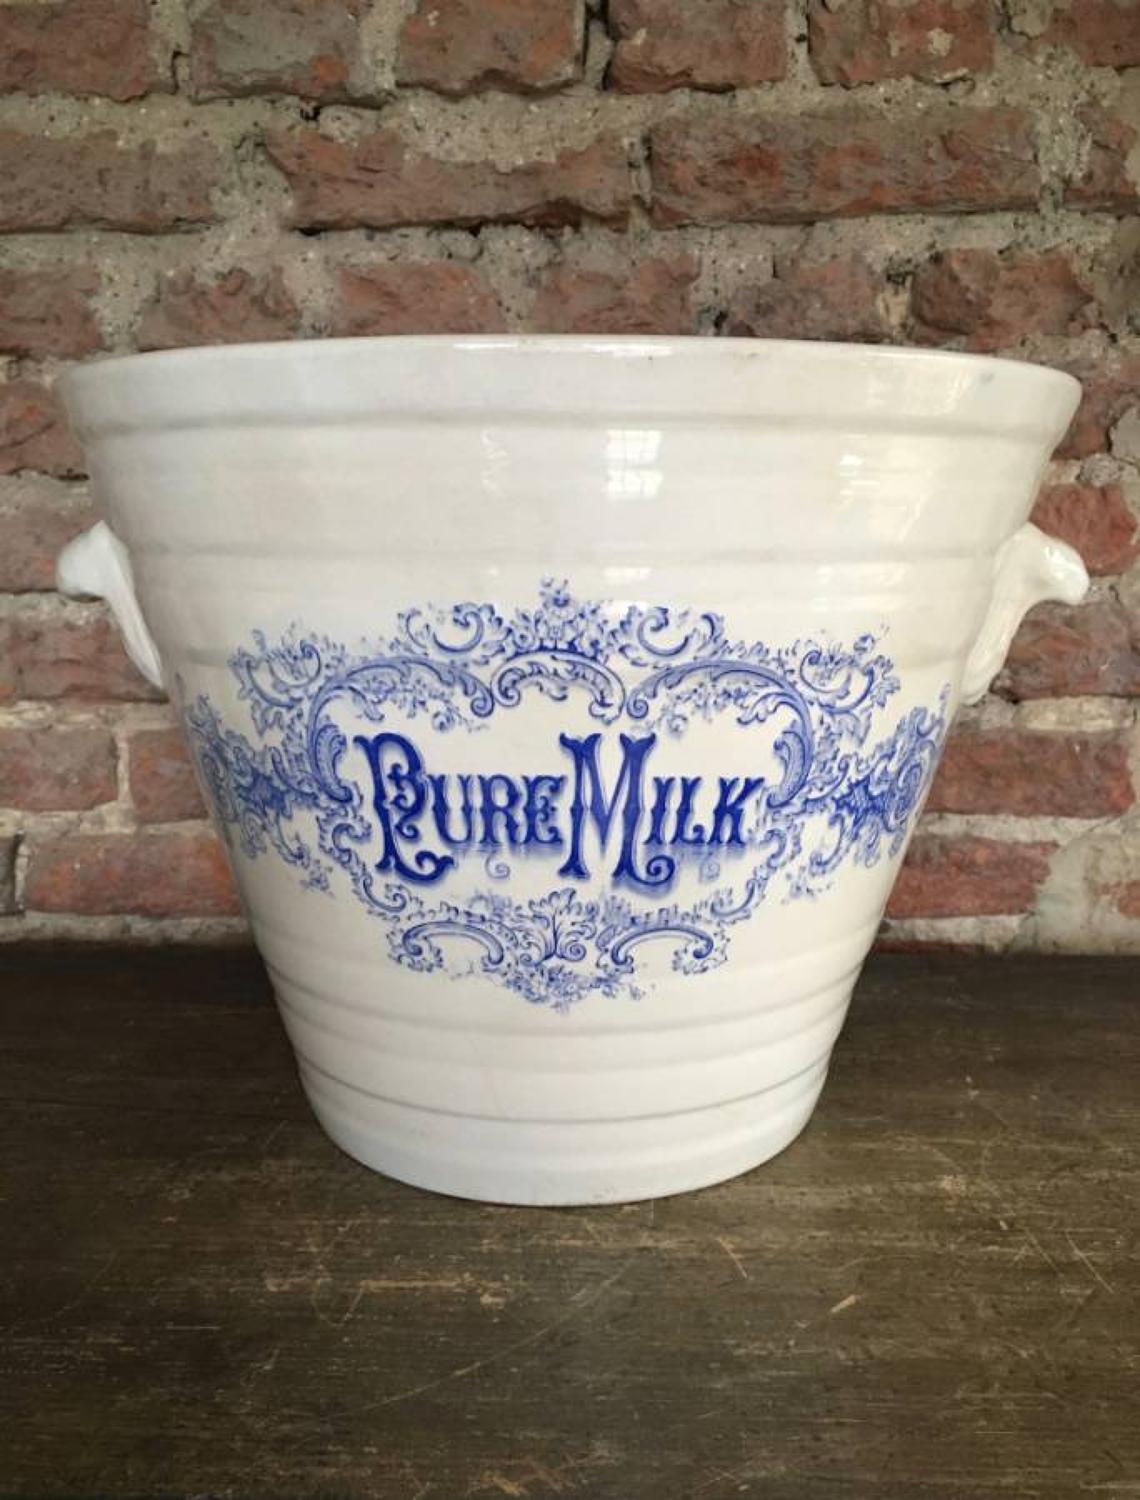 Late Victorian Pure Milk Pail - The Dairy Outfit Co. Ltd